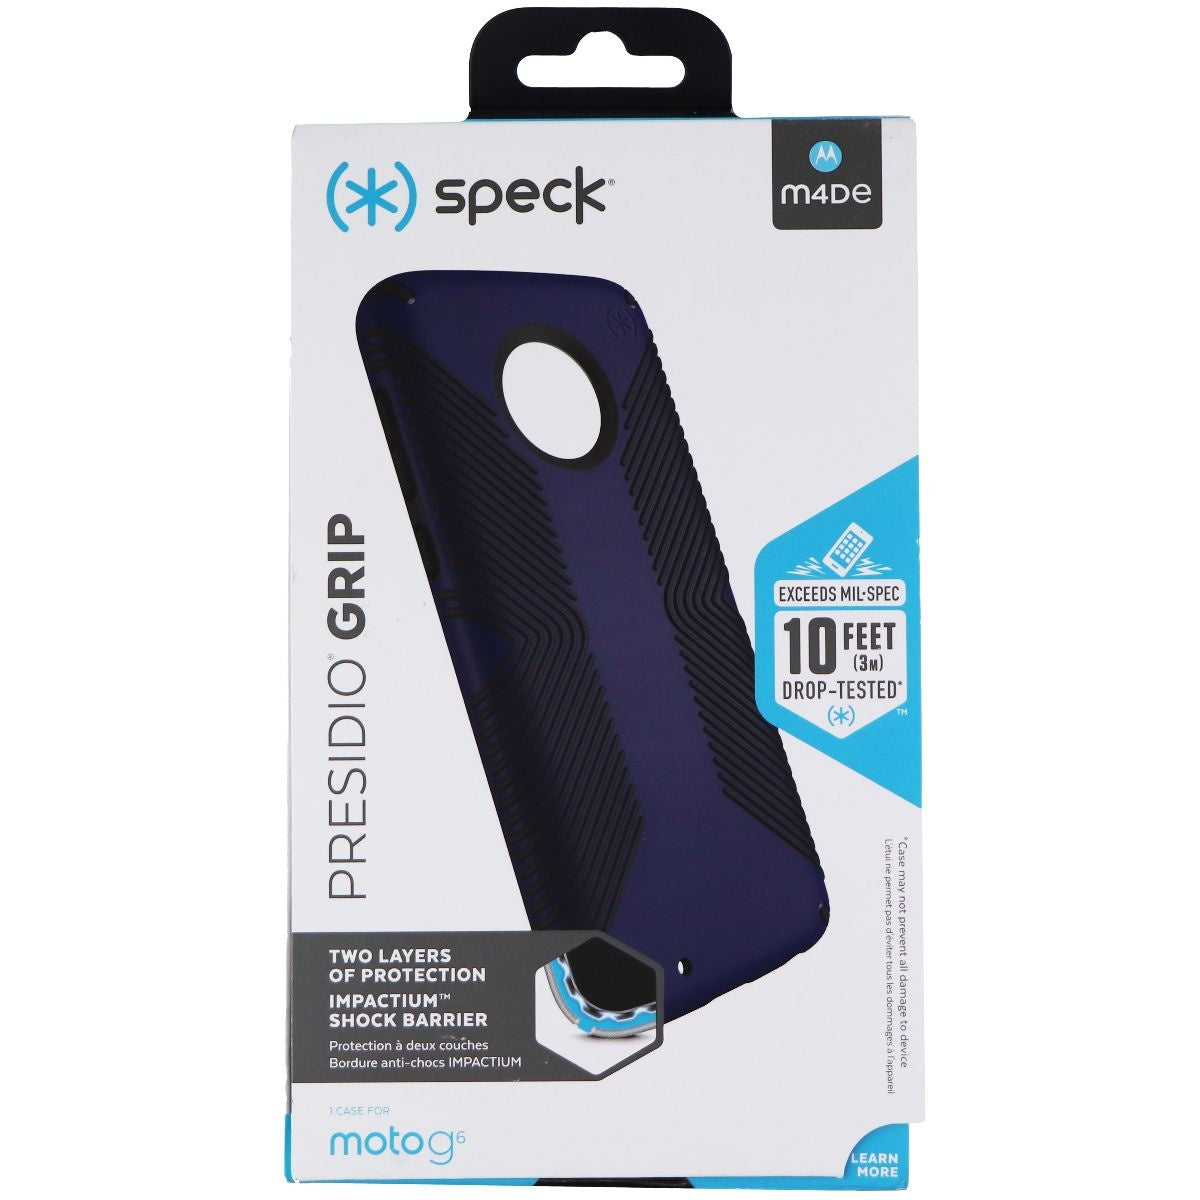 Speck Presidio Grip Hybrid Case for Motorola Moto G6 - Eclipse Blue/Carbon Black Cell Phone - Cases, Covers & Skins Speck    - Simple Cell Bulk Wholesale Pricing - USA Seller